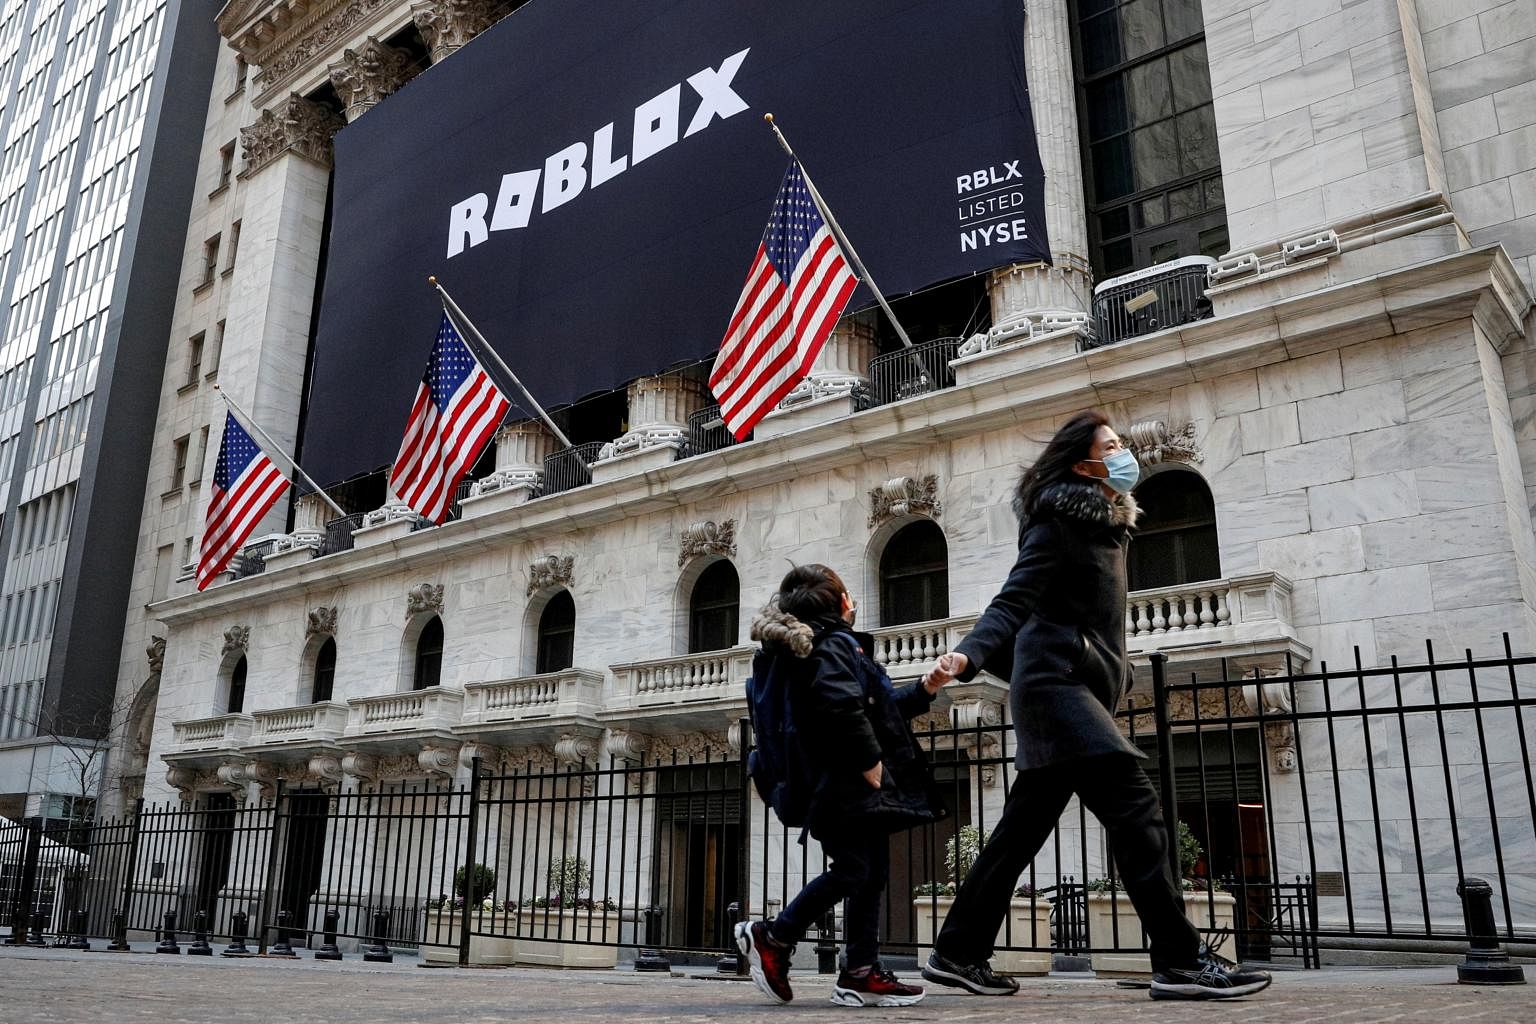 Gaming firm Roblox sued for $200M over music copyright issues